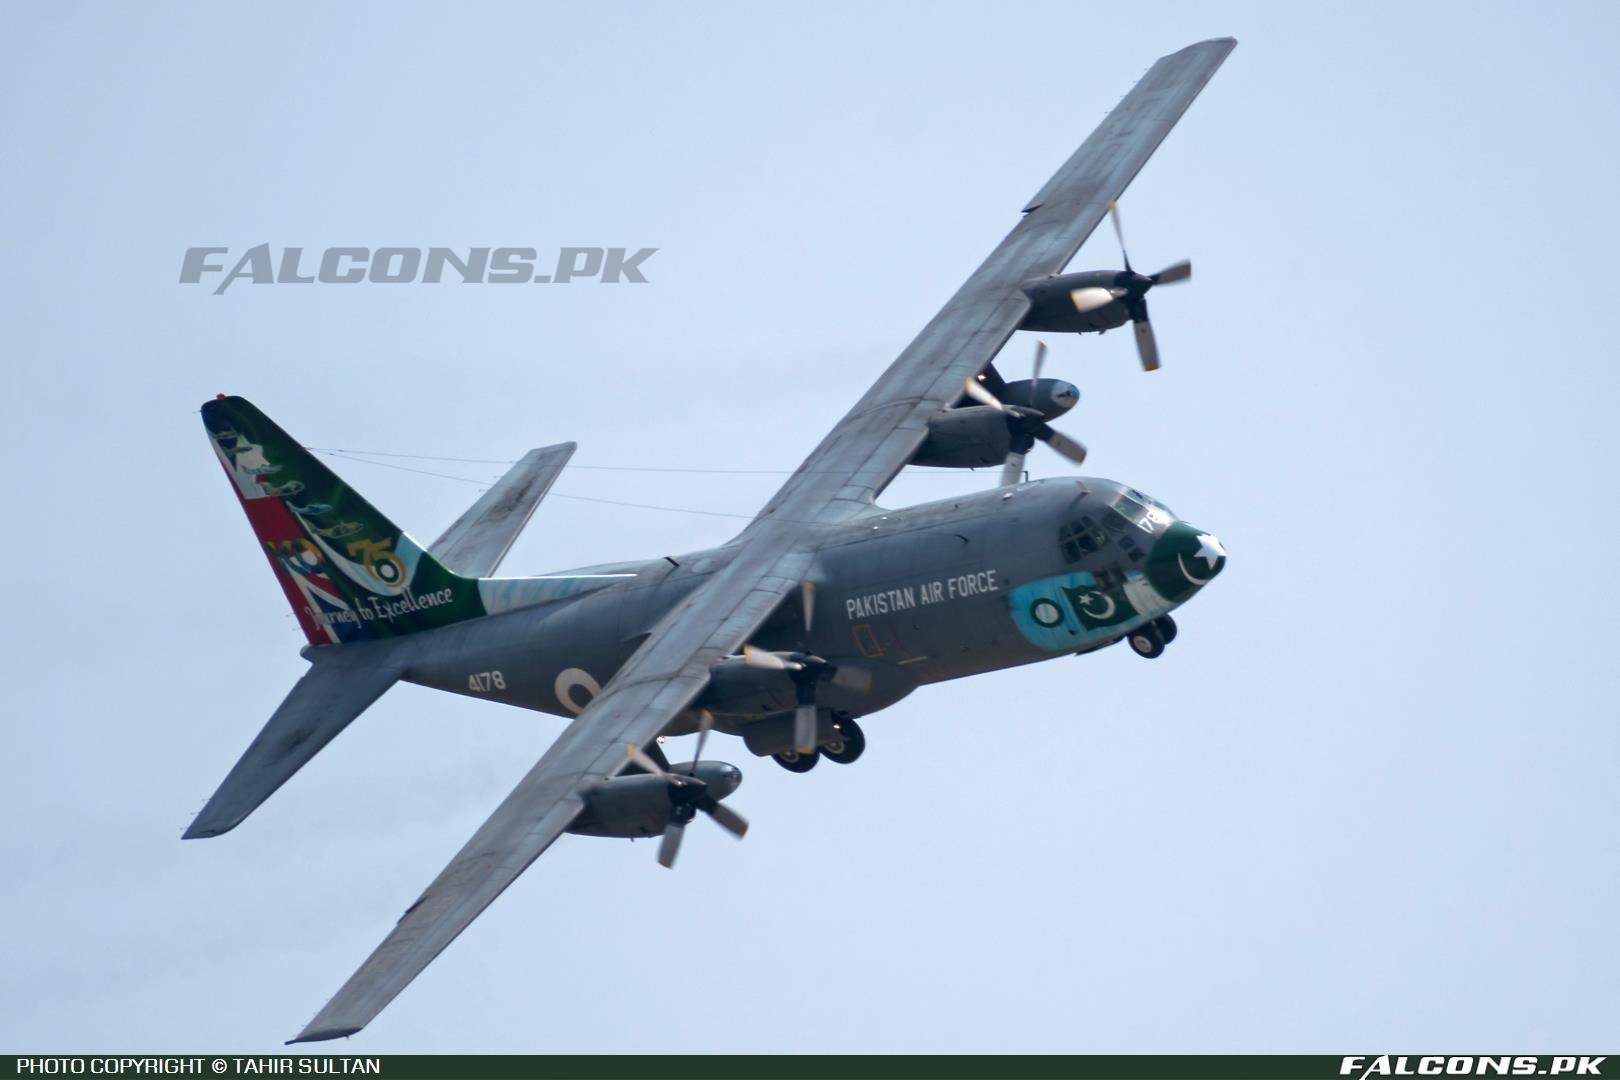 PAF C 130 aircraft airlifts